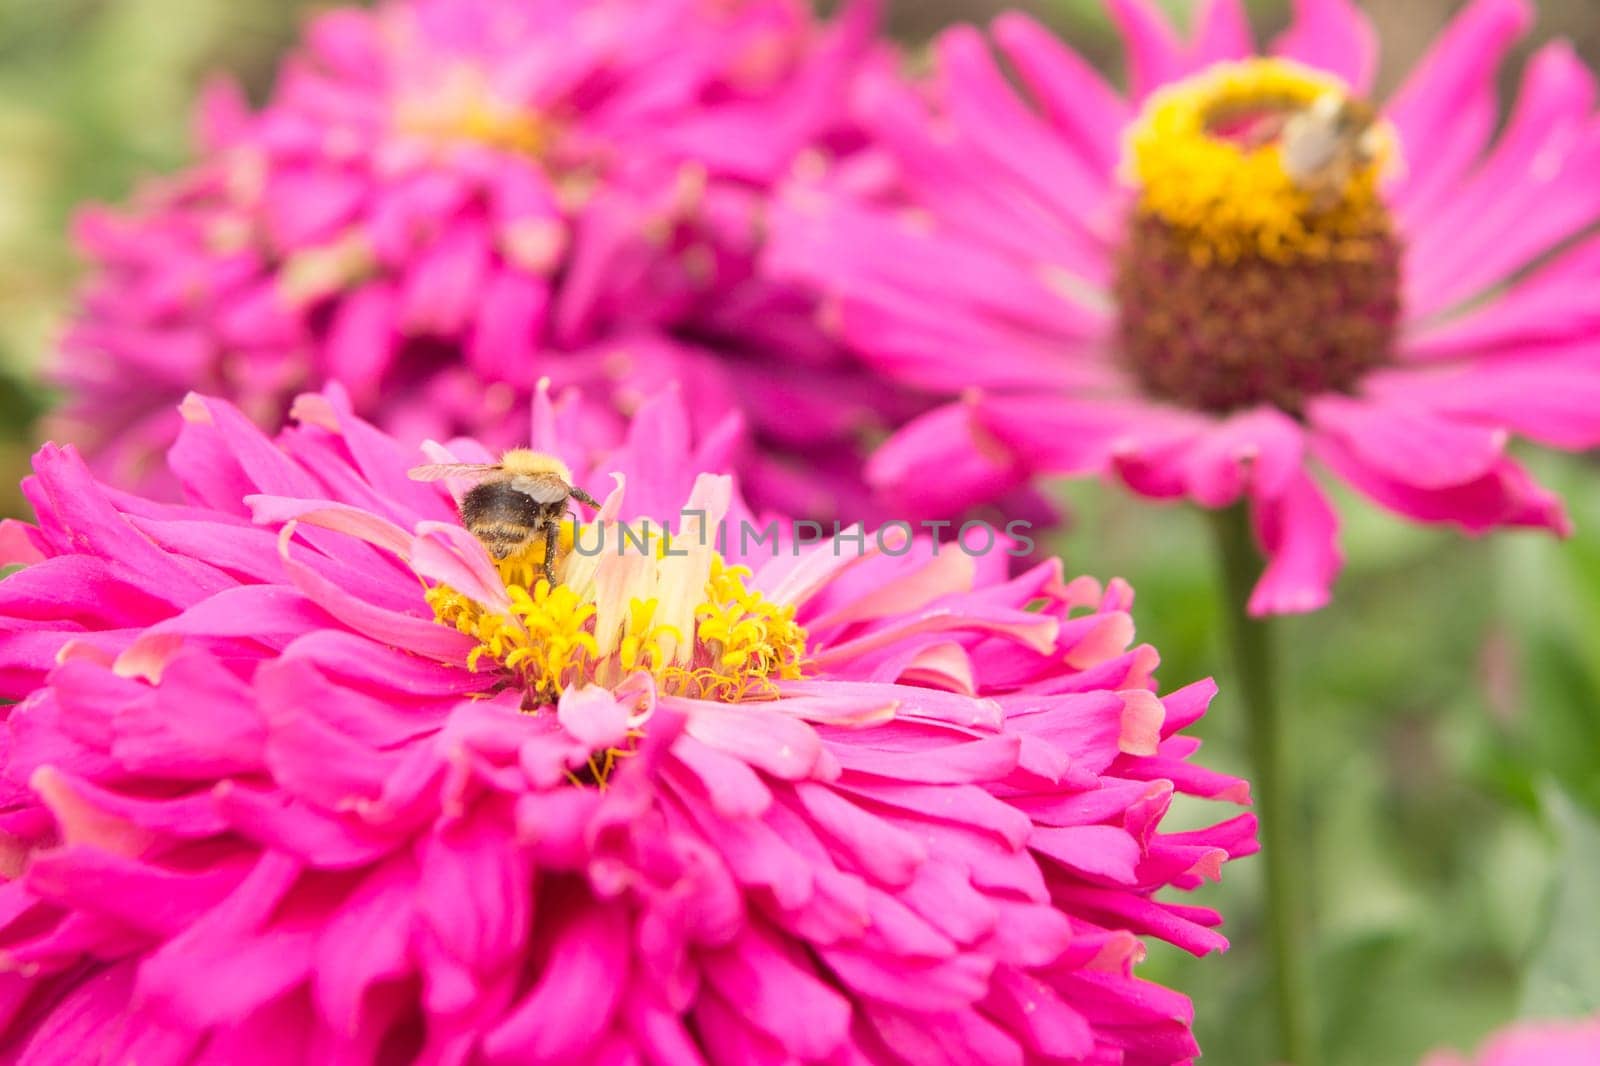 Beautiful pink flowers growing in the garden. Gardening concept, close-up. The flower is pollinated by a bumblebee. by Annu1tochka